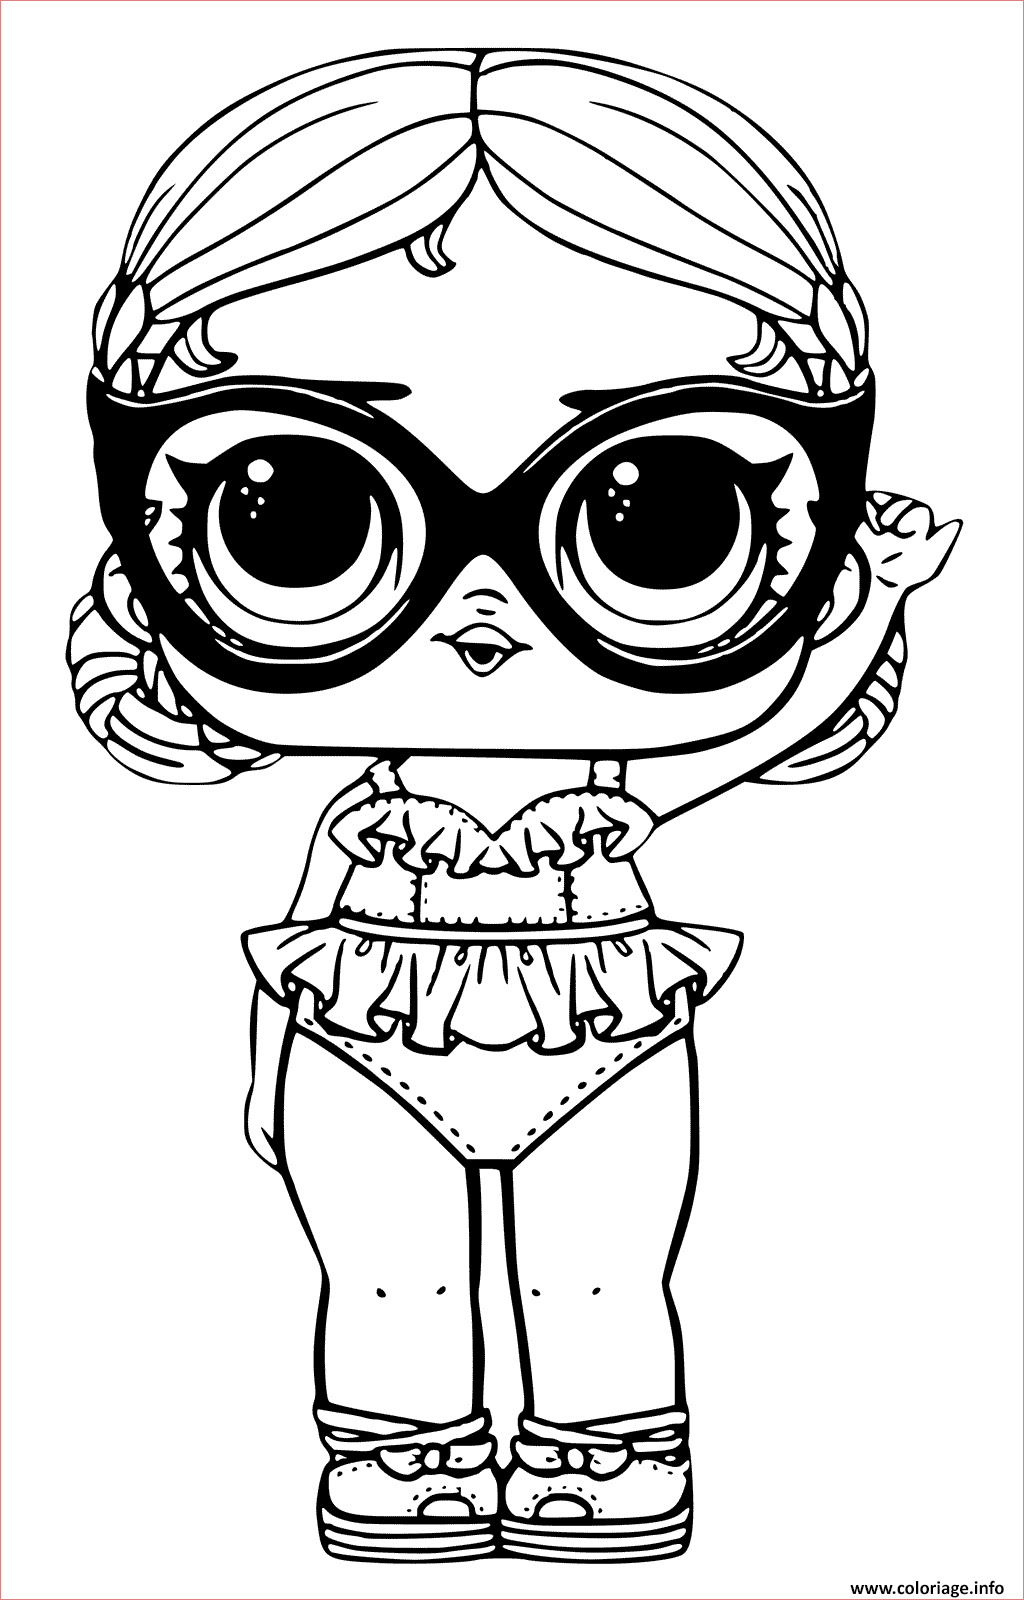 Coloriage Lol A Imprimer Génial Coloriage Page Of Lol Doll Vacay Babay à Imprimer